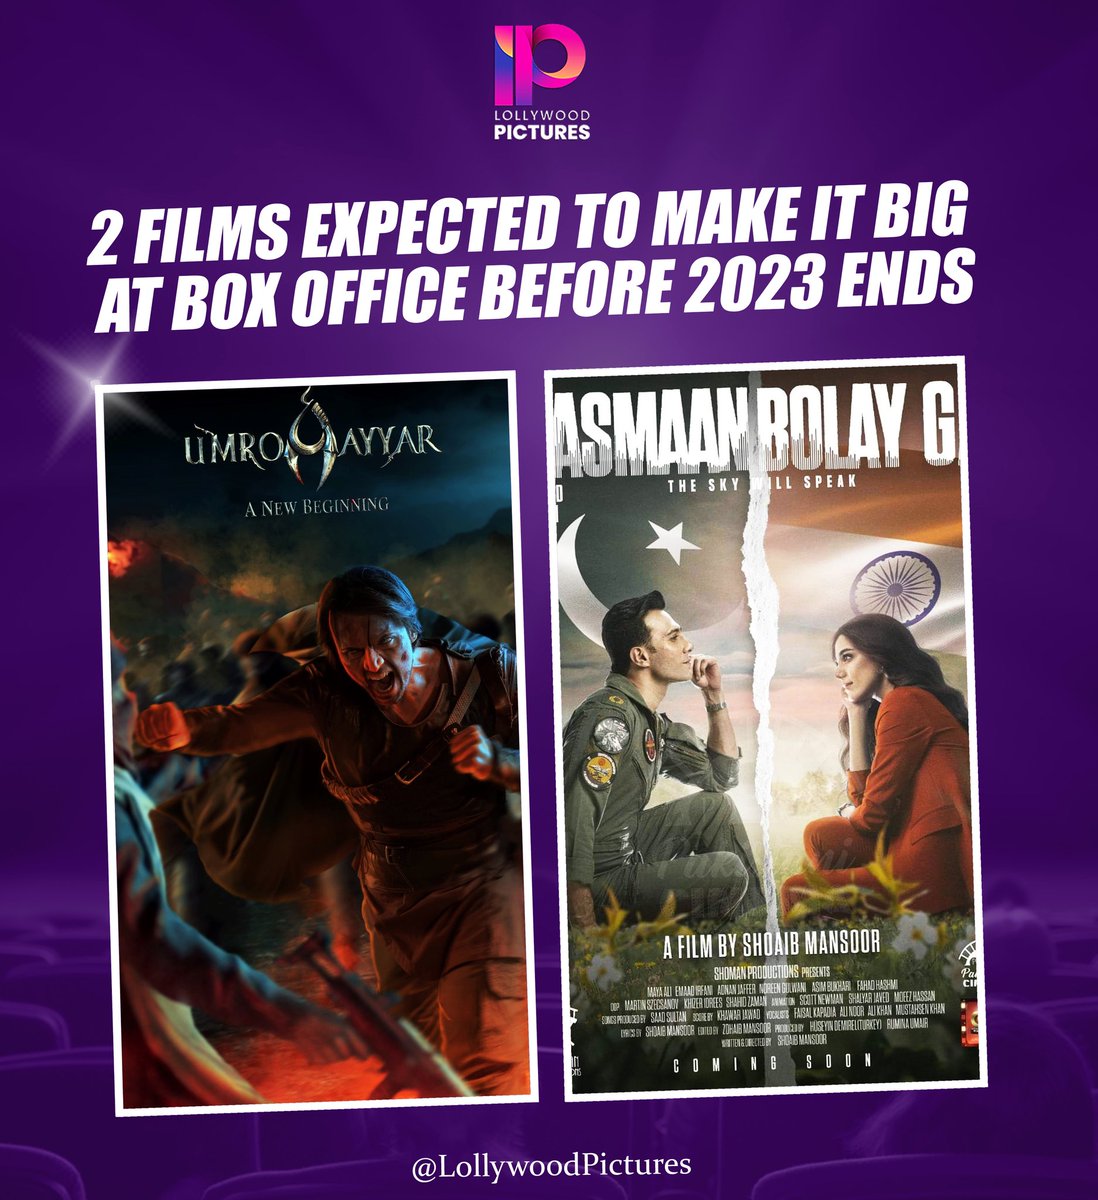 After a very dull first 6 months at the box office, we are hopeful for a better end to this year 2023 with two mega movies, Aasmaan Bolay Ga and UmroAyyar all set to release later this year. 

#UmroAyyarANewBeginning #AasmaanBolayGa #UsmanMukhtar #EmmadIrfani #lollywoodPictures